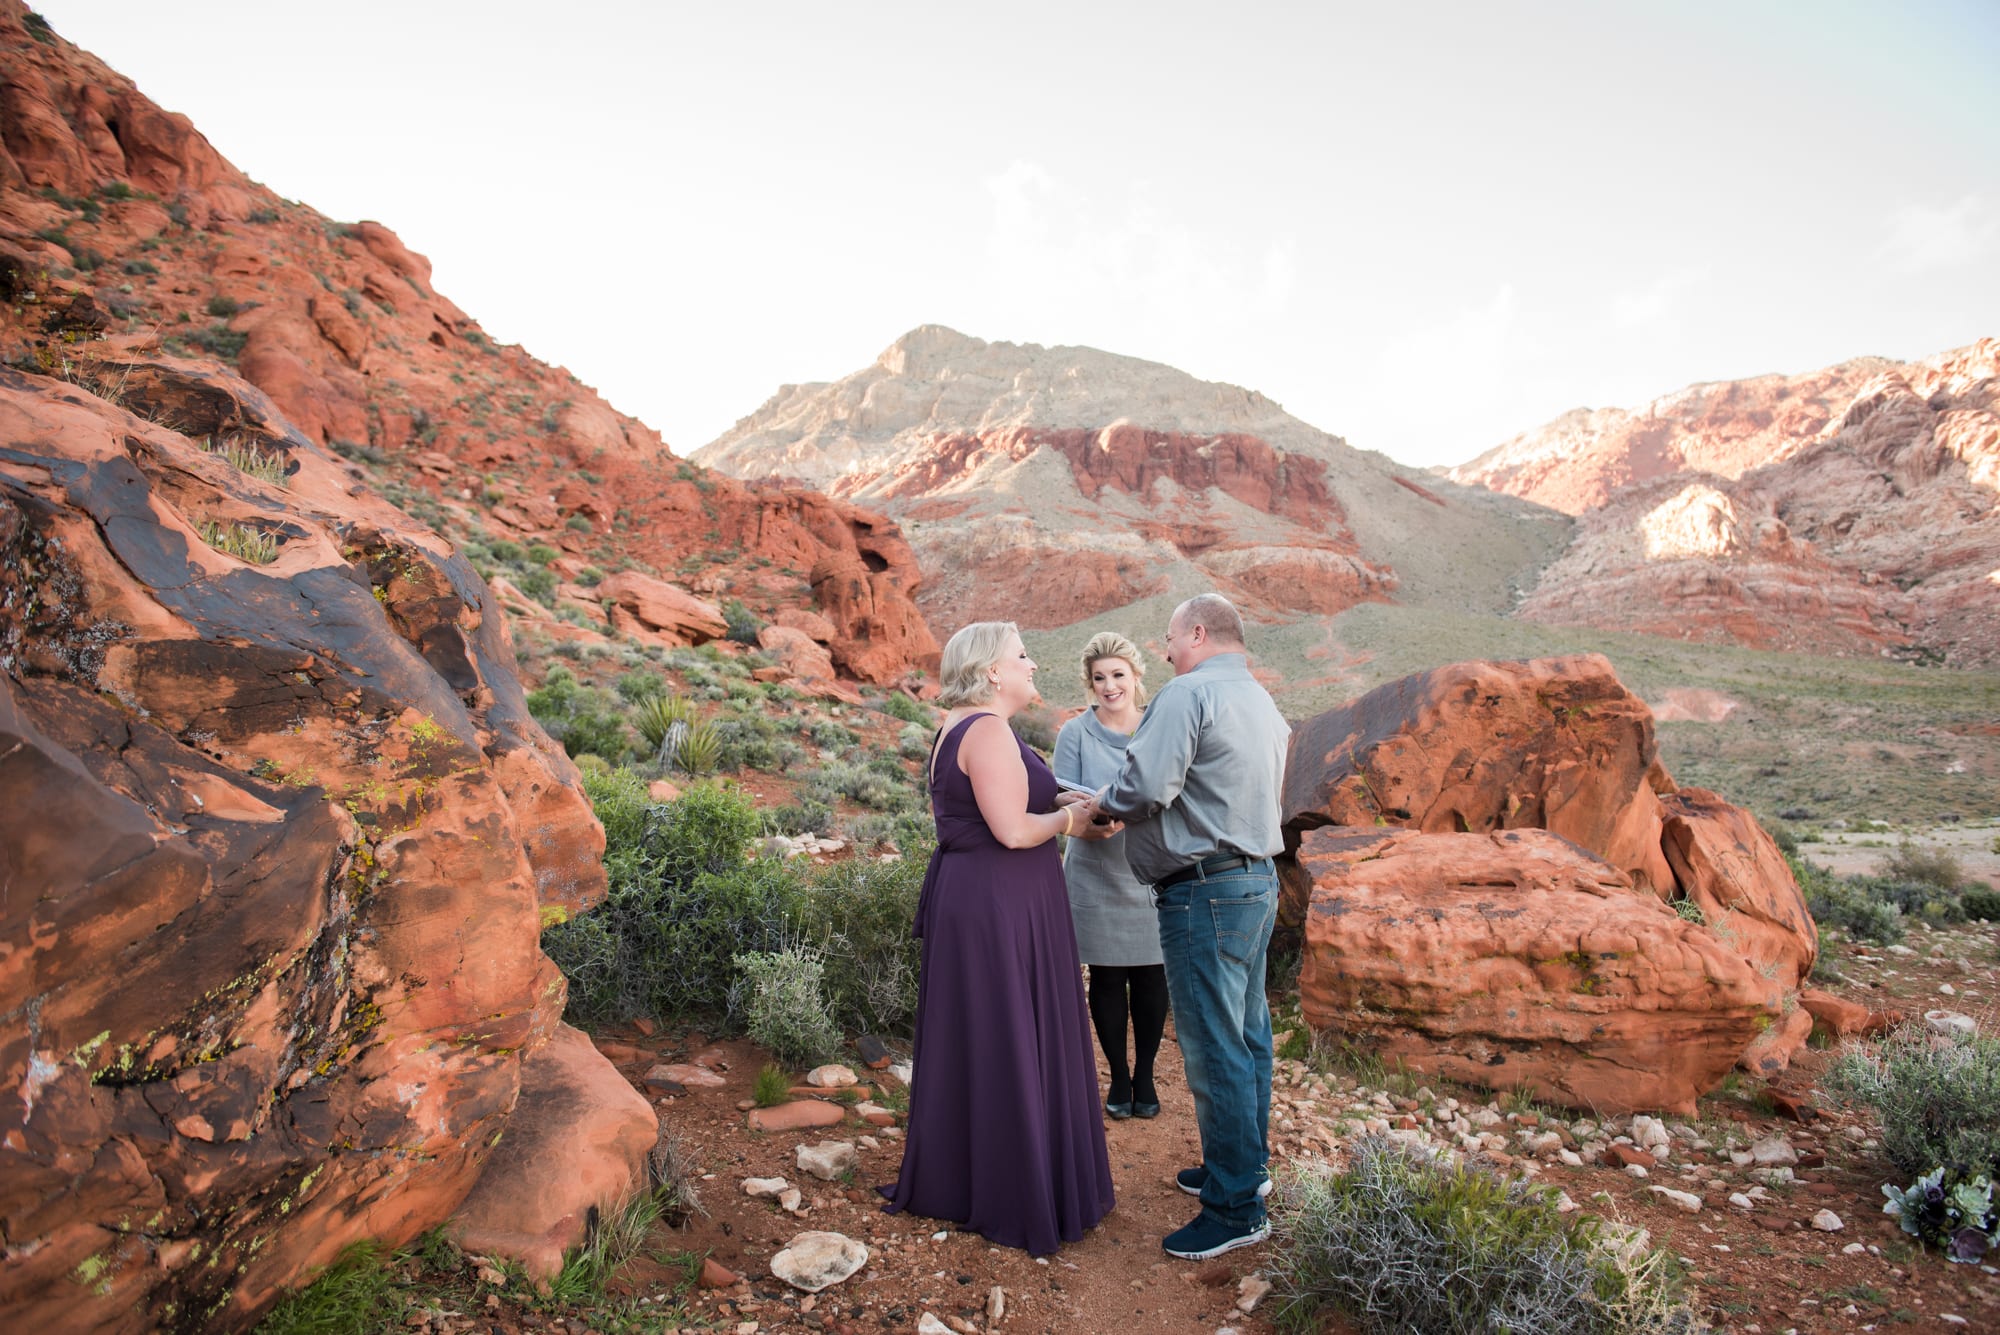 Impromptu Vow Renewals Are a Great Way to Say “I Do” All Over Again While You’re in Las Vegas